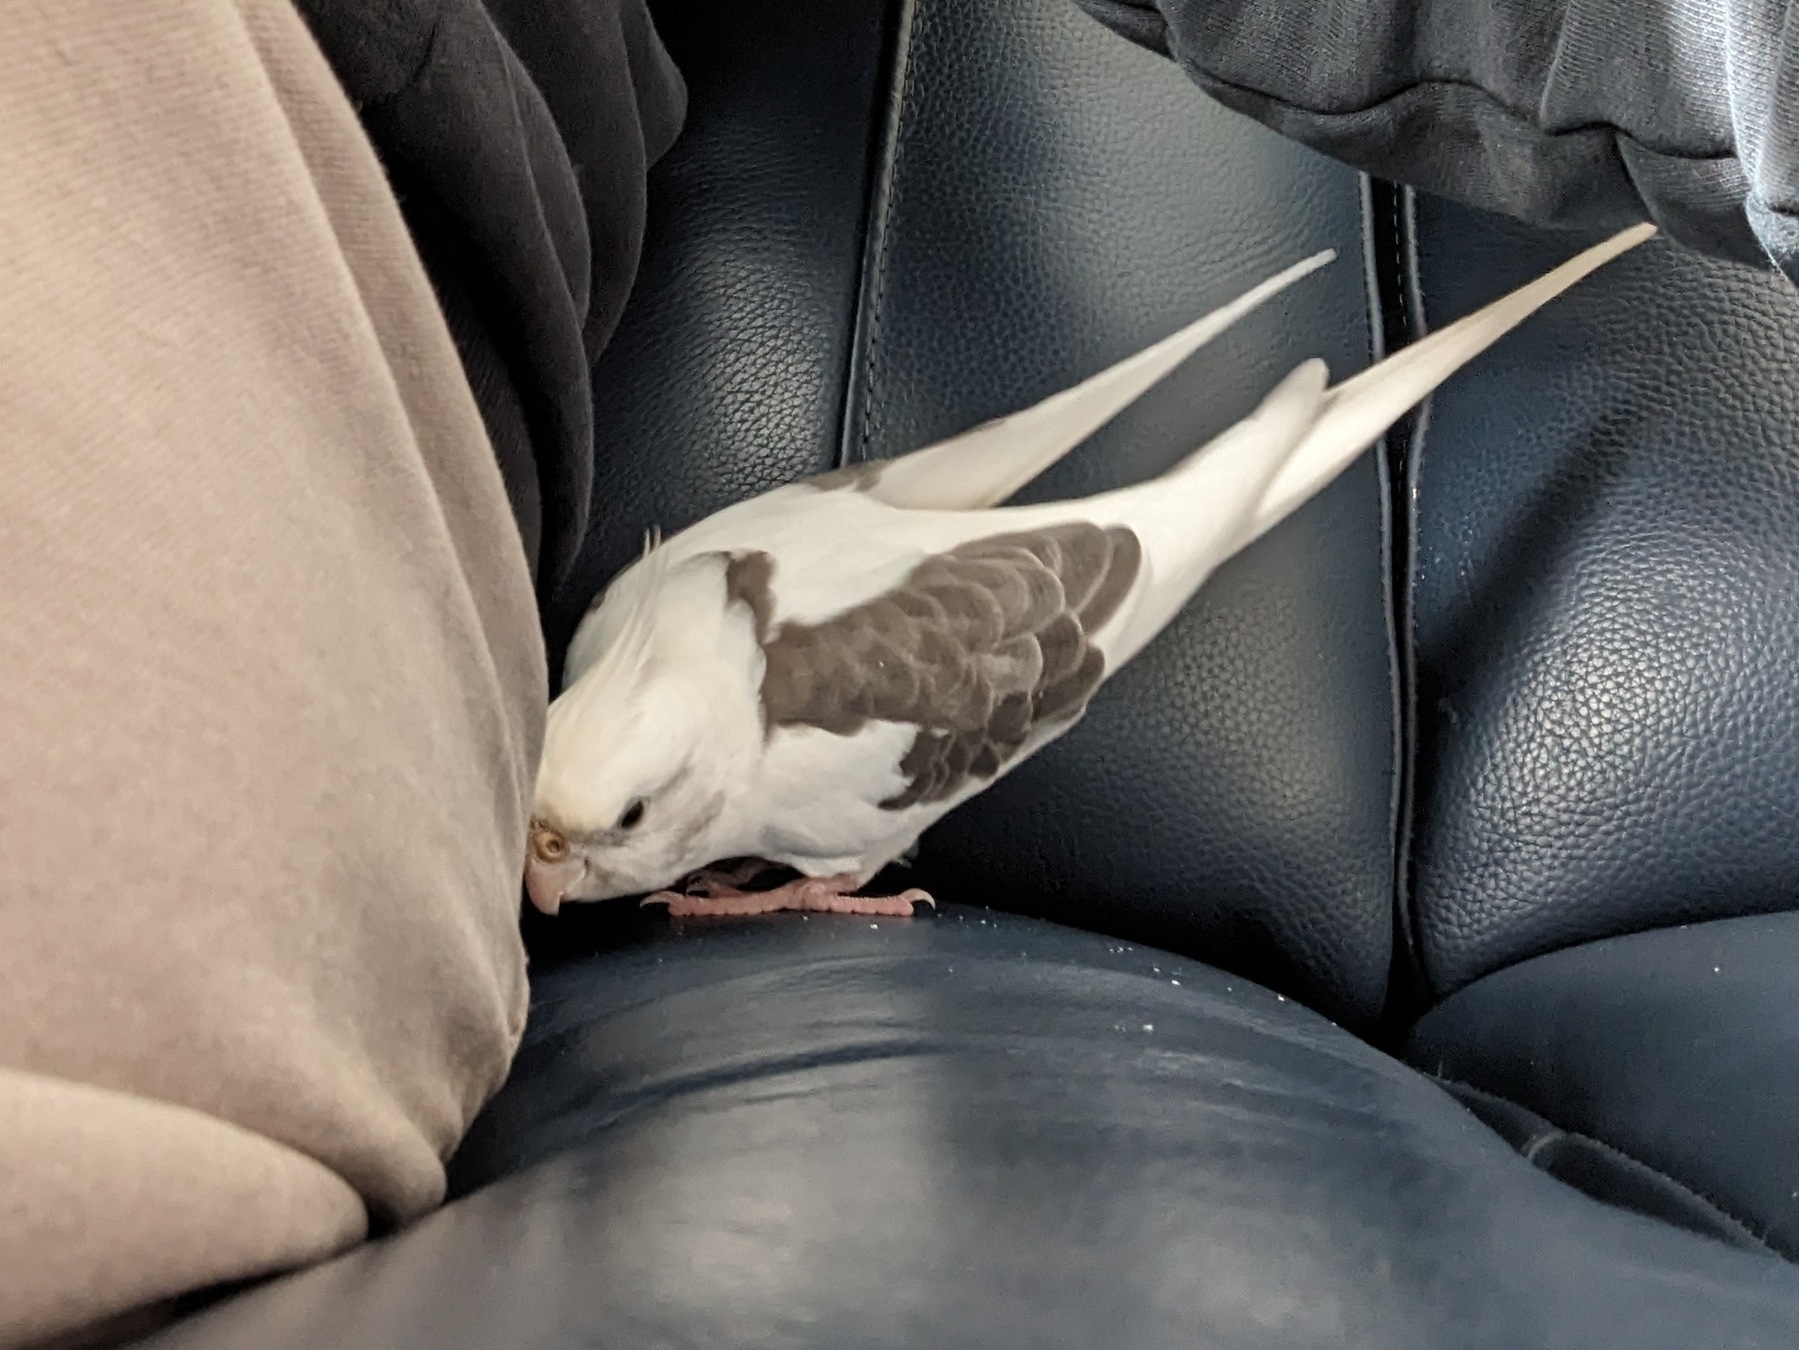 Auto-generated description: A small white and gray bird is nestled between the cushions of a dark leather seat next to one leg of a pair of tanned trousers.